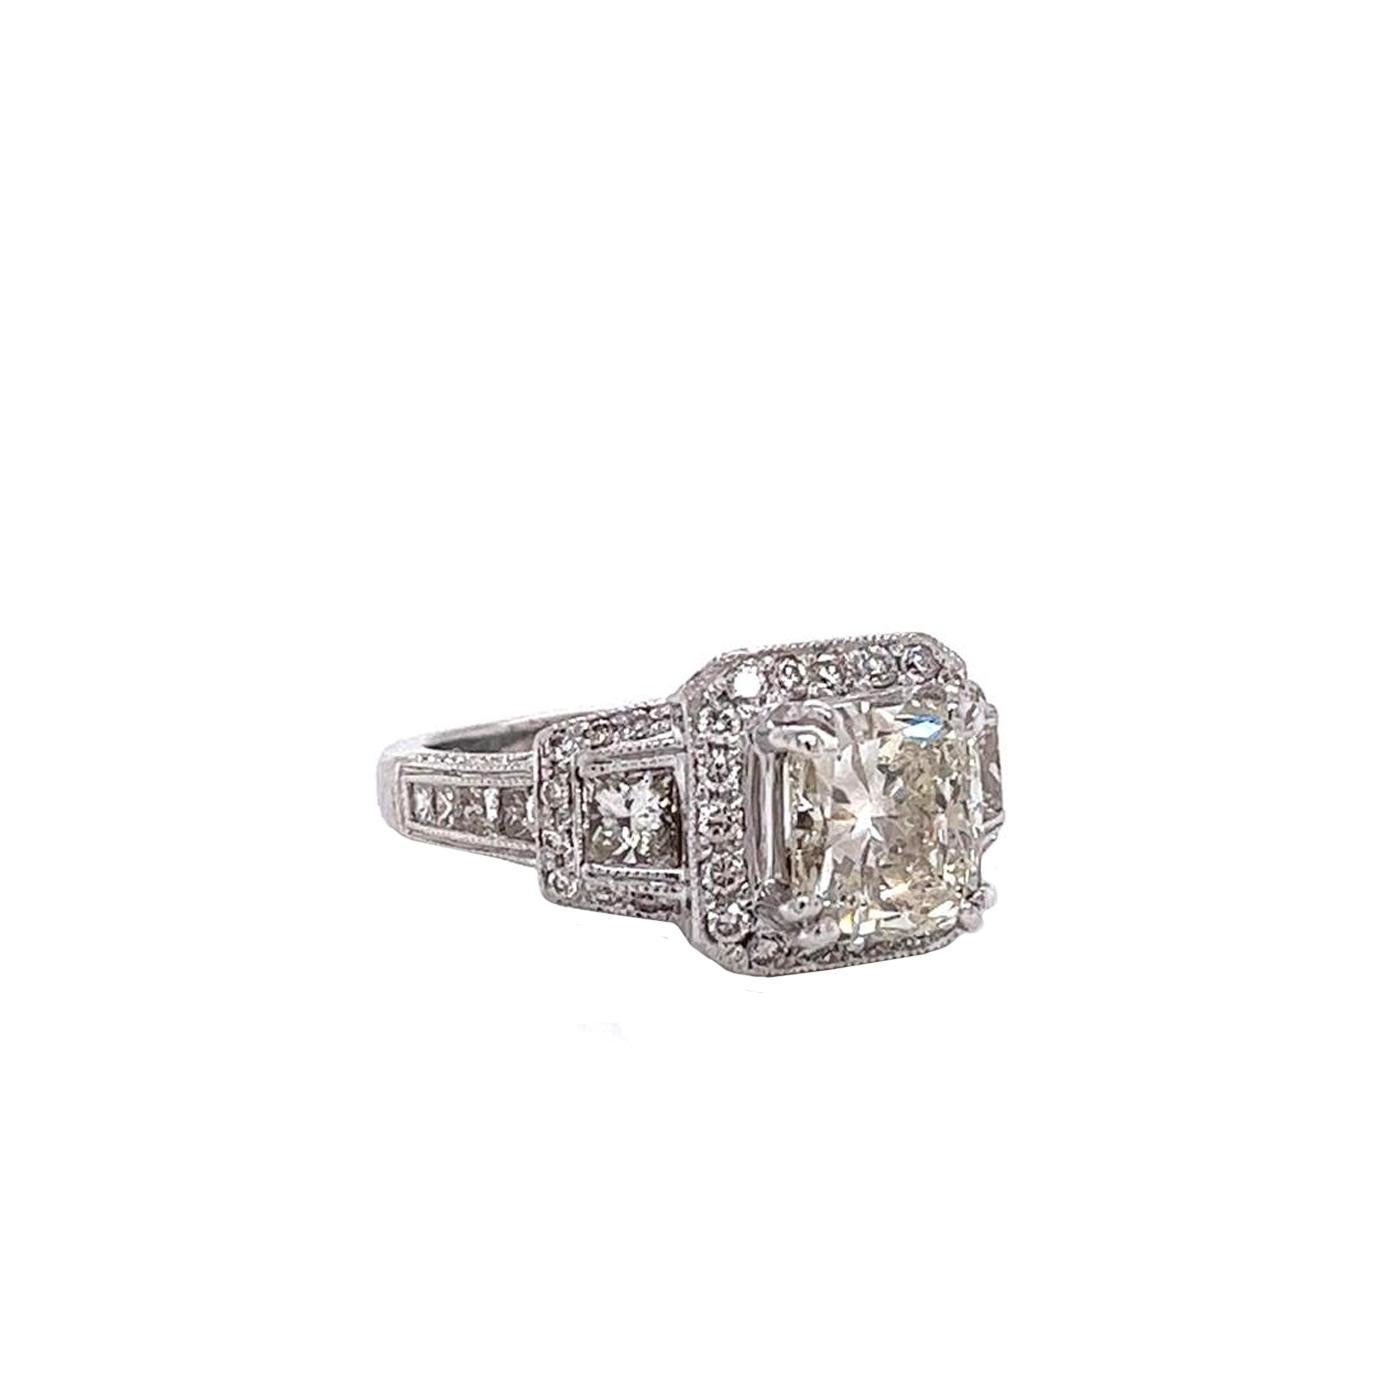 Exceptional GIA Graded 2.02 Carat Cushion Diamond Ring with 0.68ct Pave 14k Gold In Good Condition For Sale In Aventura, FL